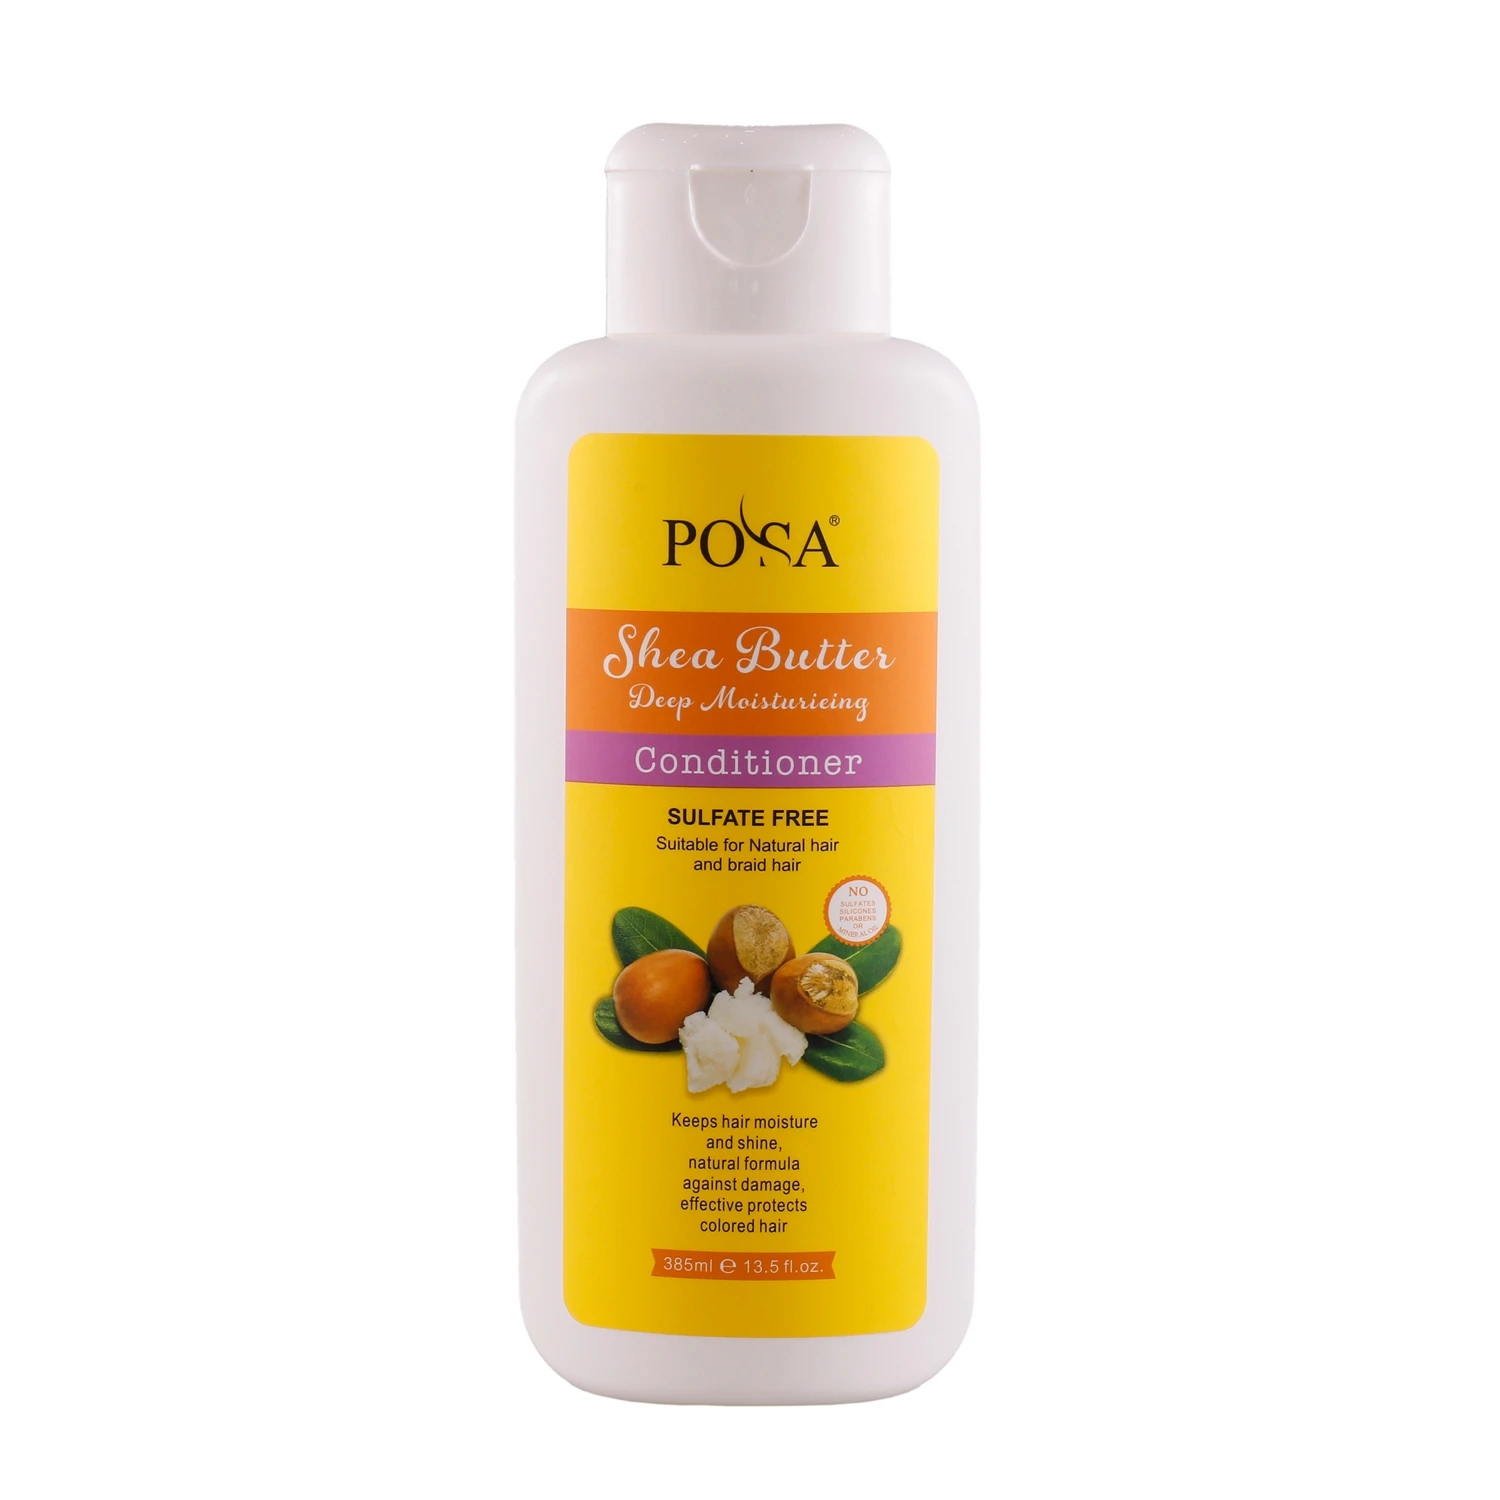 

POSA Sulphate Free Anti-Split Ends Shea Butter Conditioner Repair Damaged Hair Hair Moisture And Shine